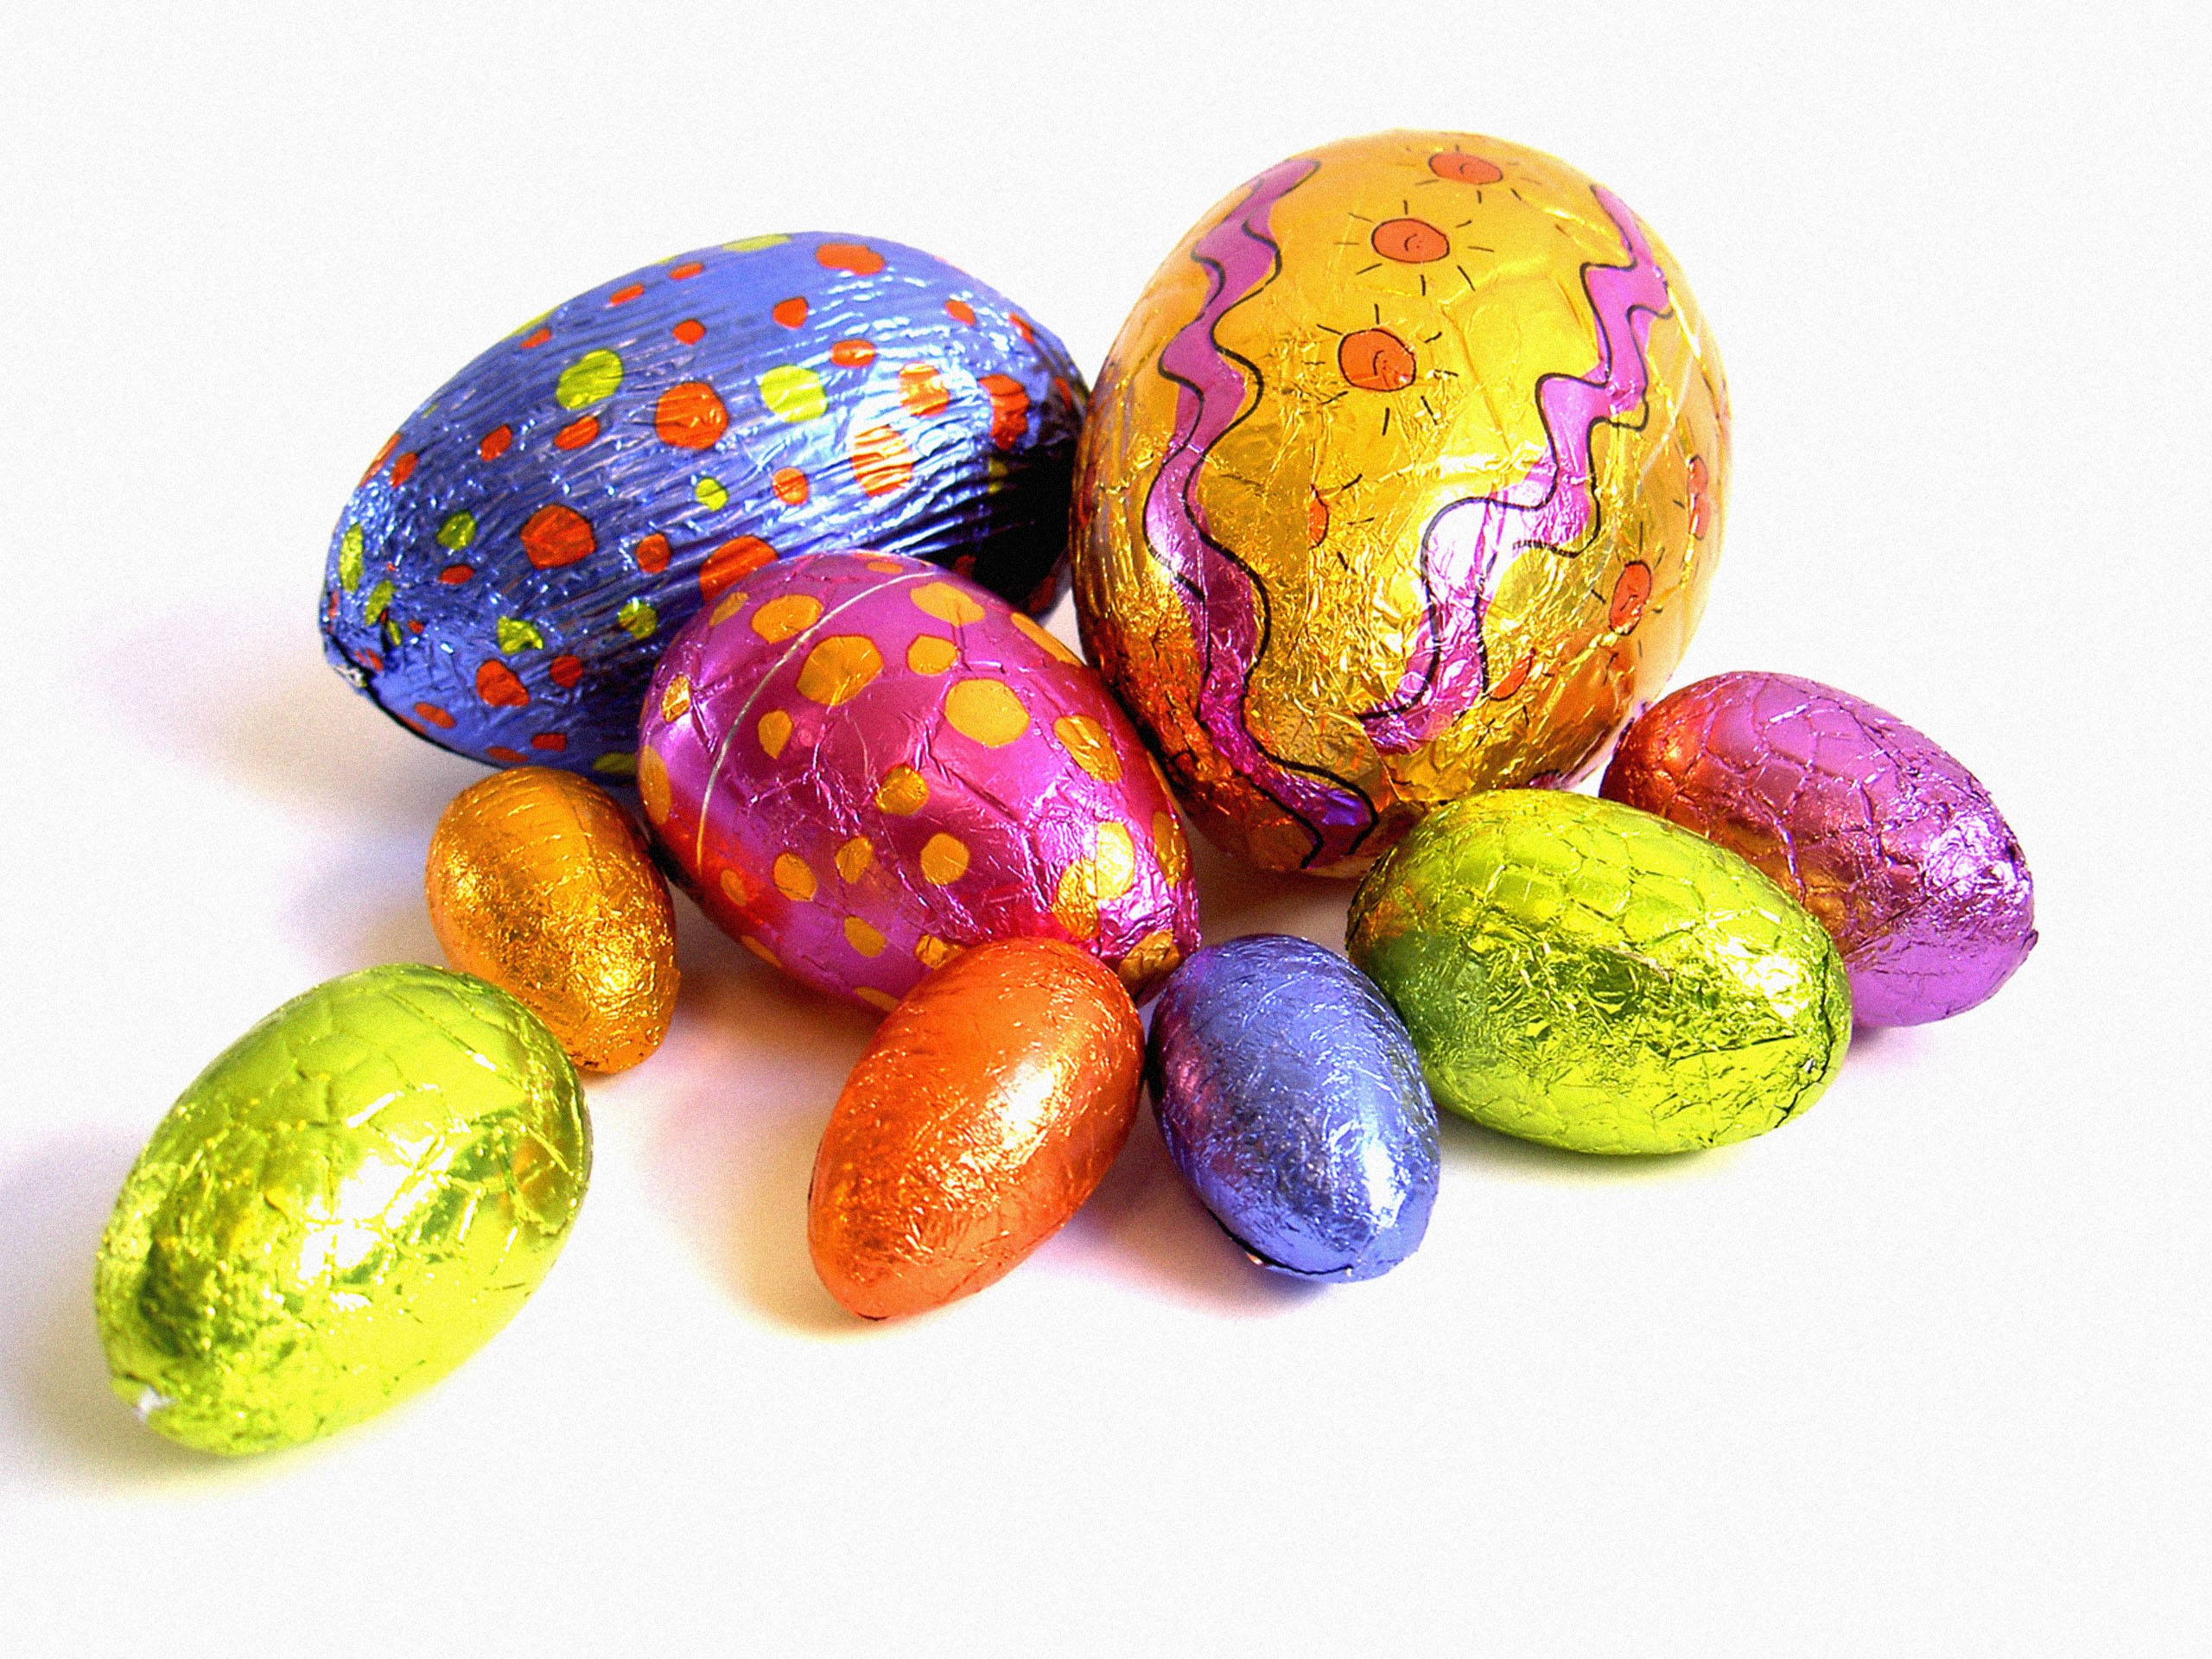 Holiday Easter HD Wallpaper | Background Image